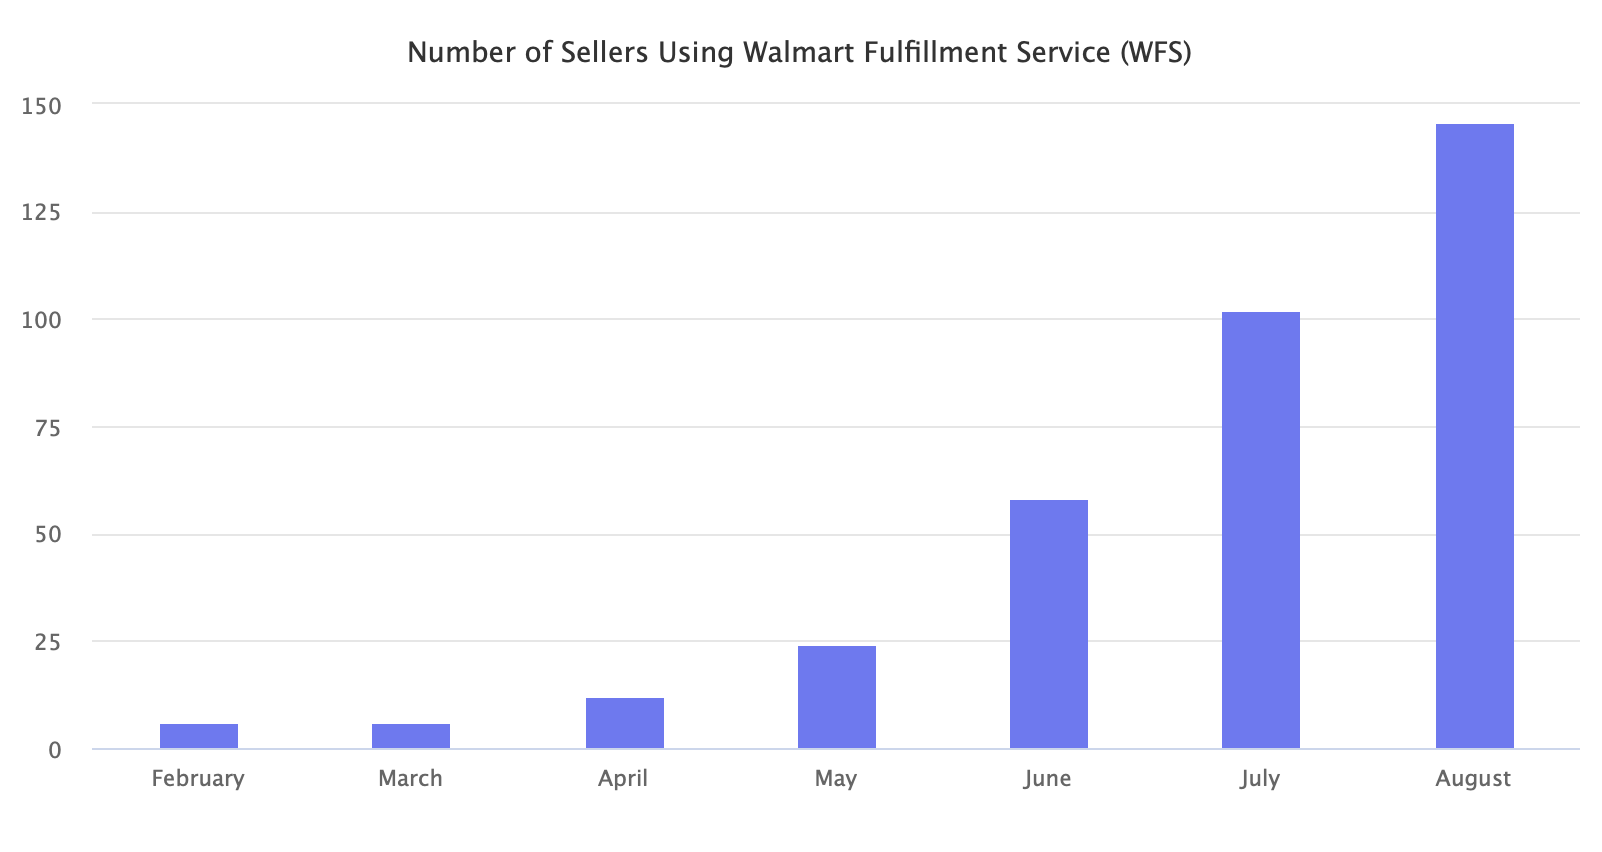 Number of Sellers Using Walmart Fulfillment Service (WFS)